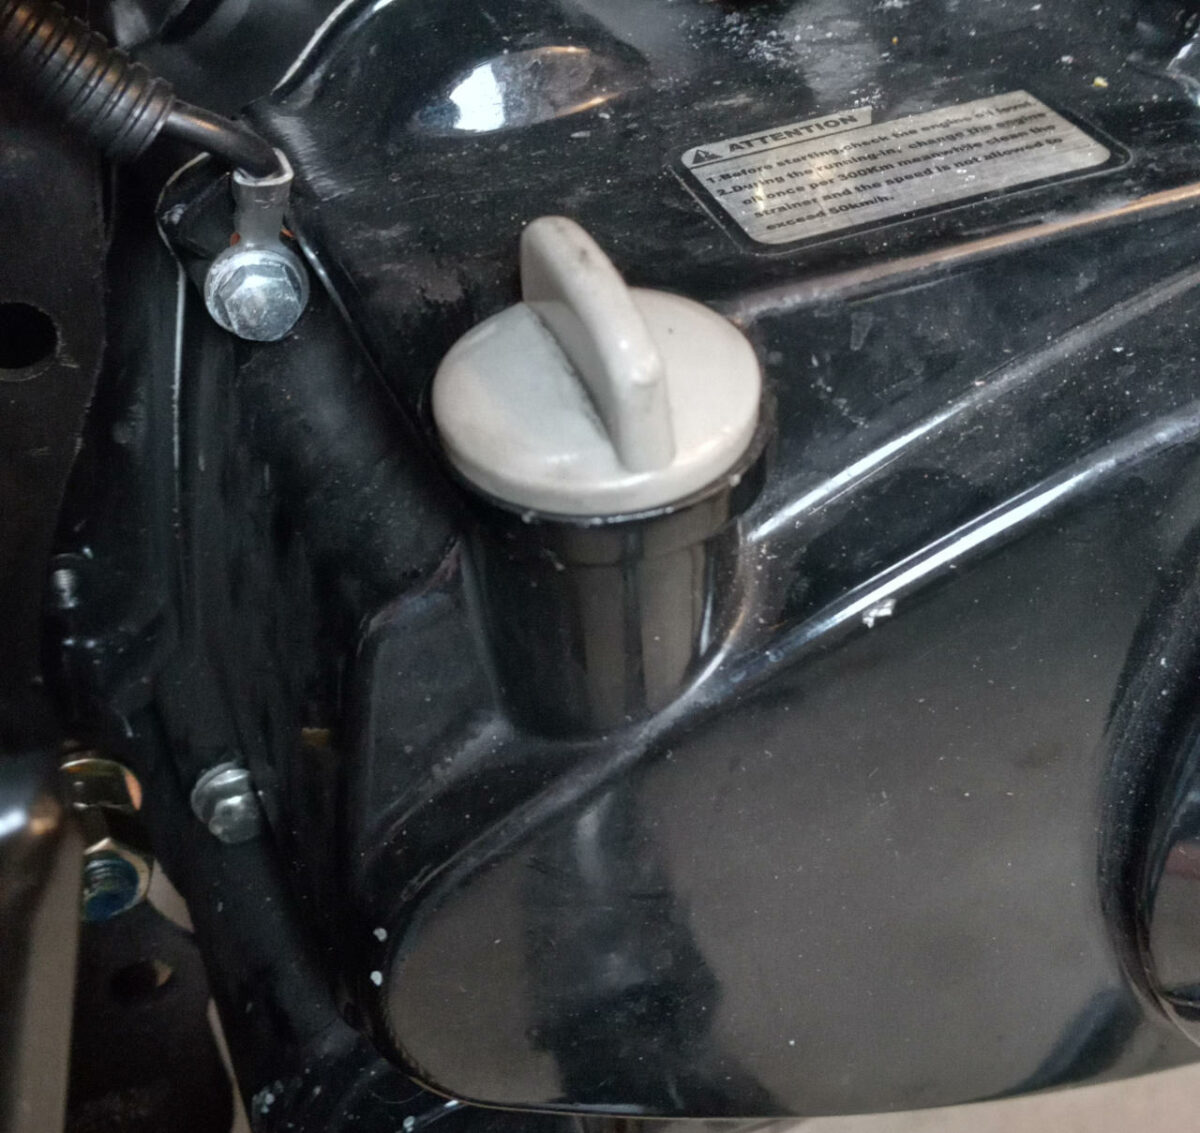 Boom Vader motorcycle engine oil dipstick fully inserted and secured.